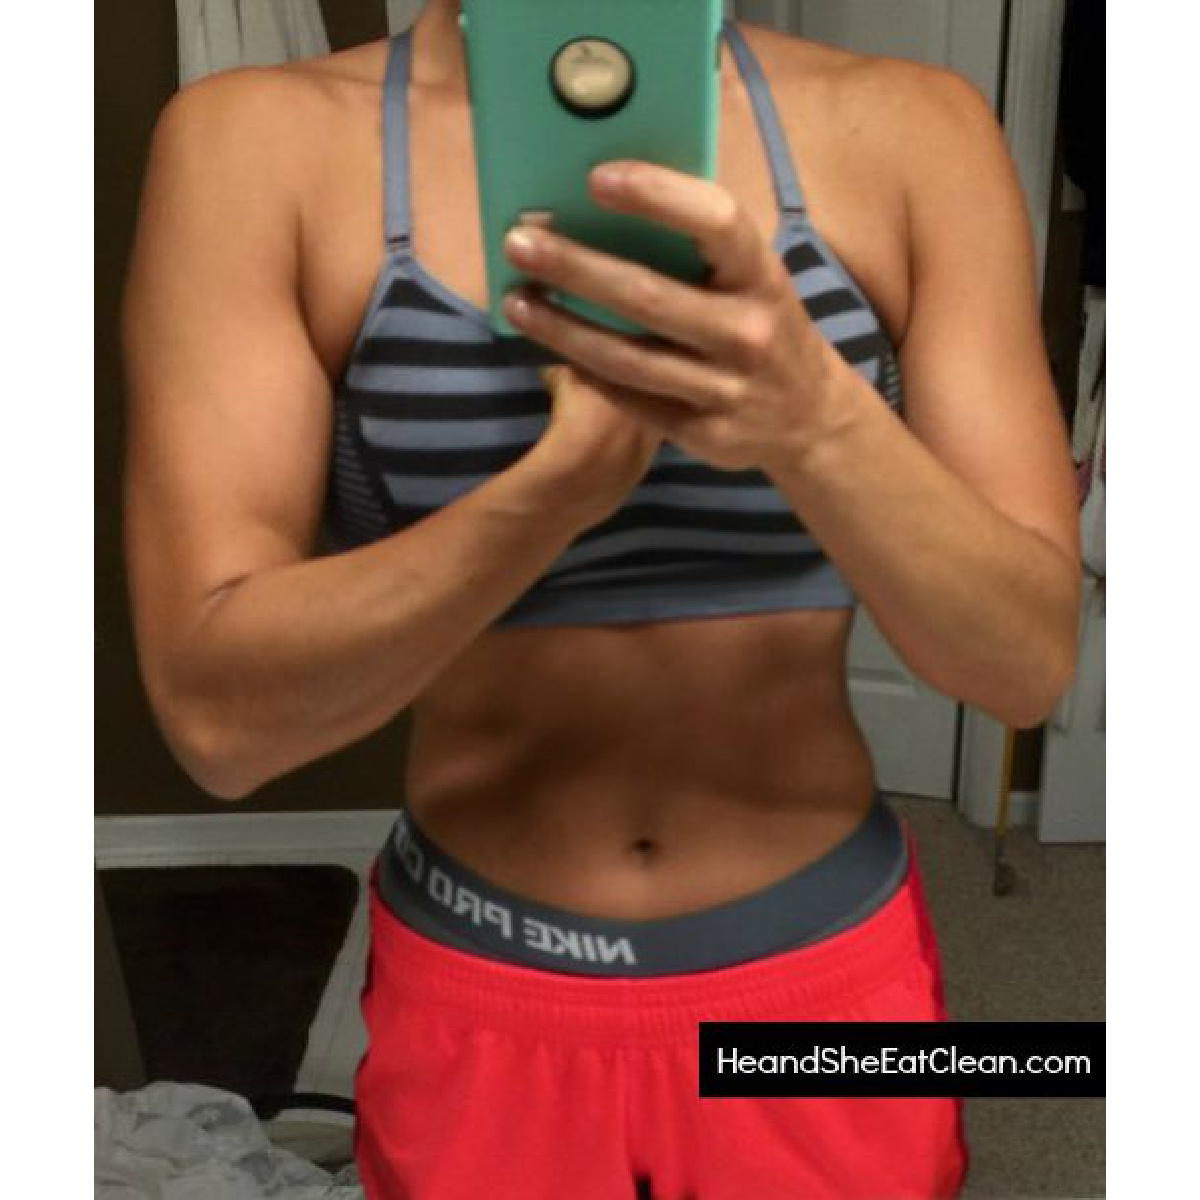 female taking a selfie flexing in a mirror wearing sports bra and pink shorts